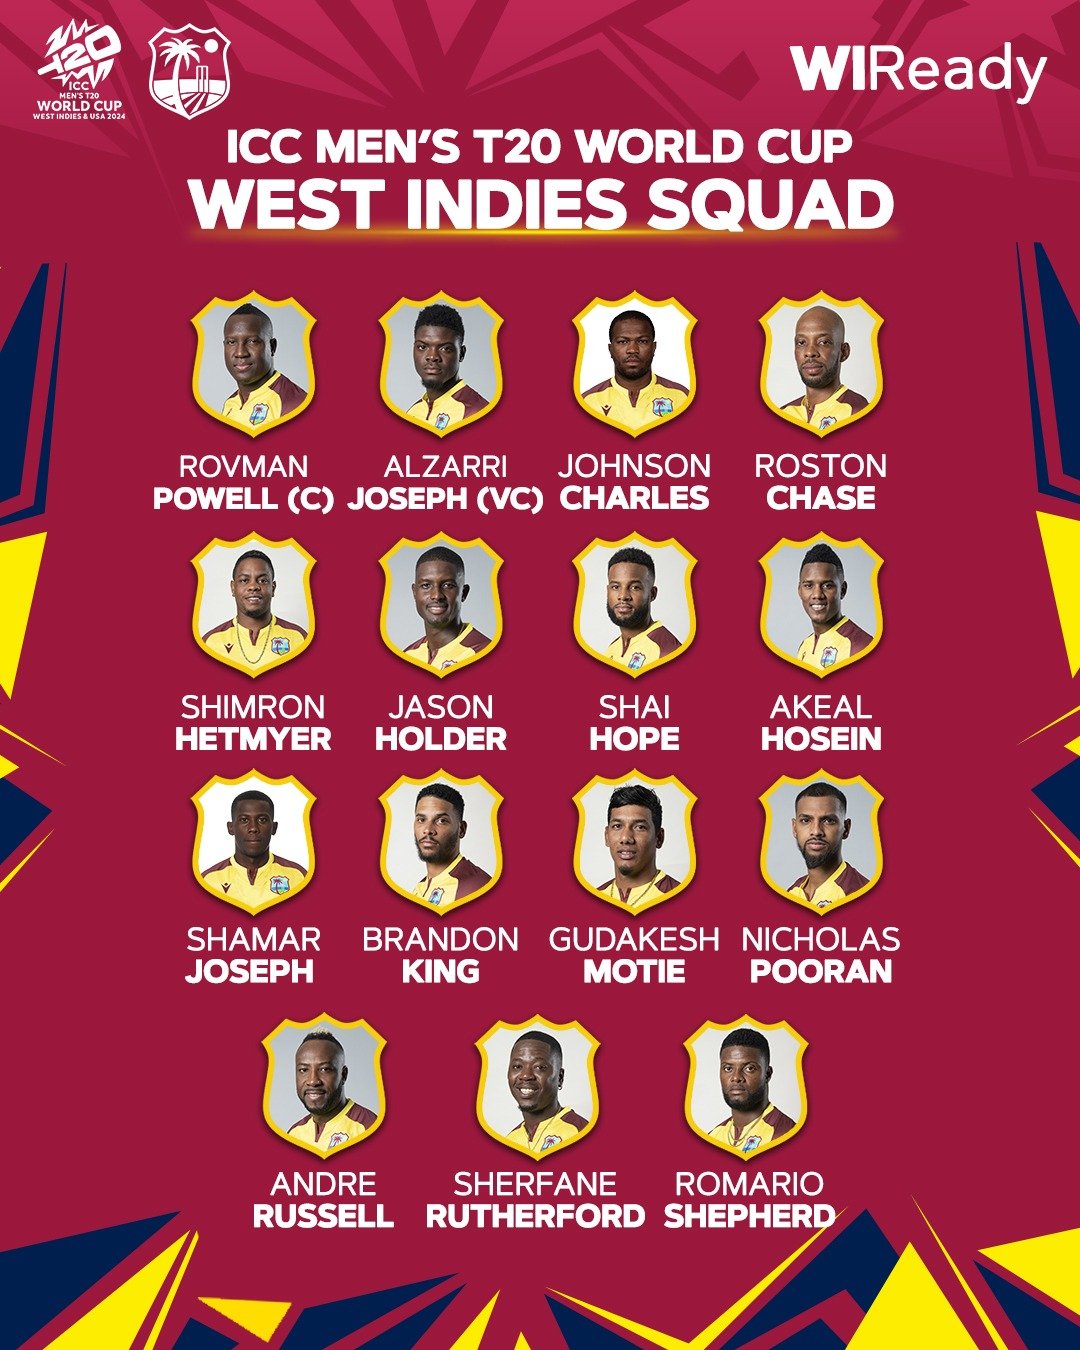 The West Indies Squad for the ICC Men's T20 Men's World Cup Announced